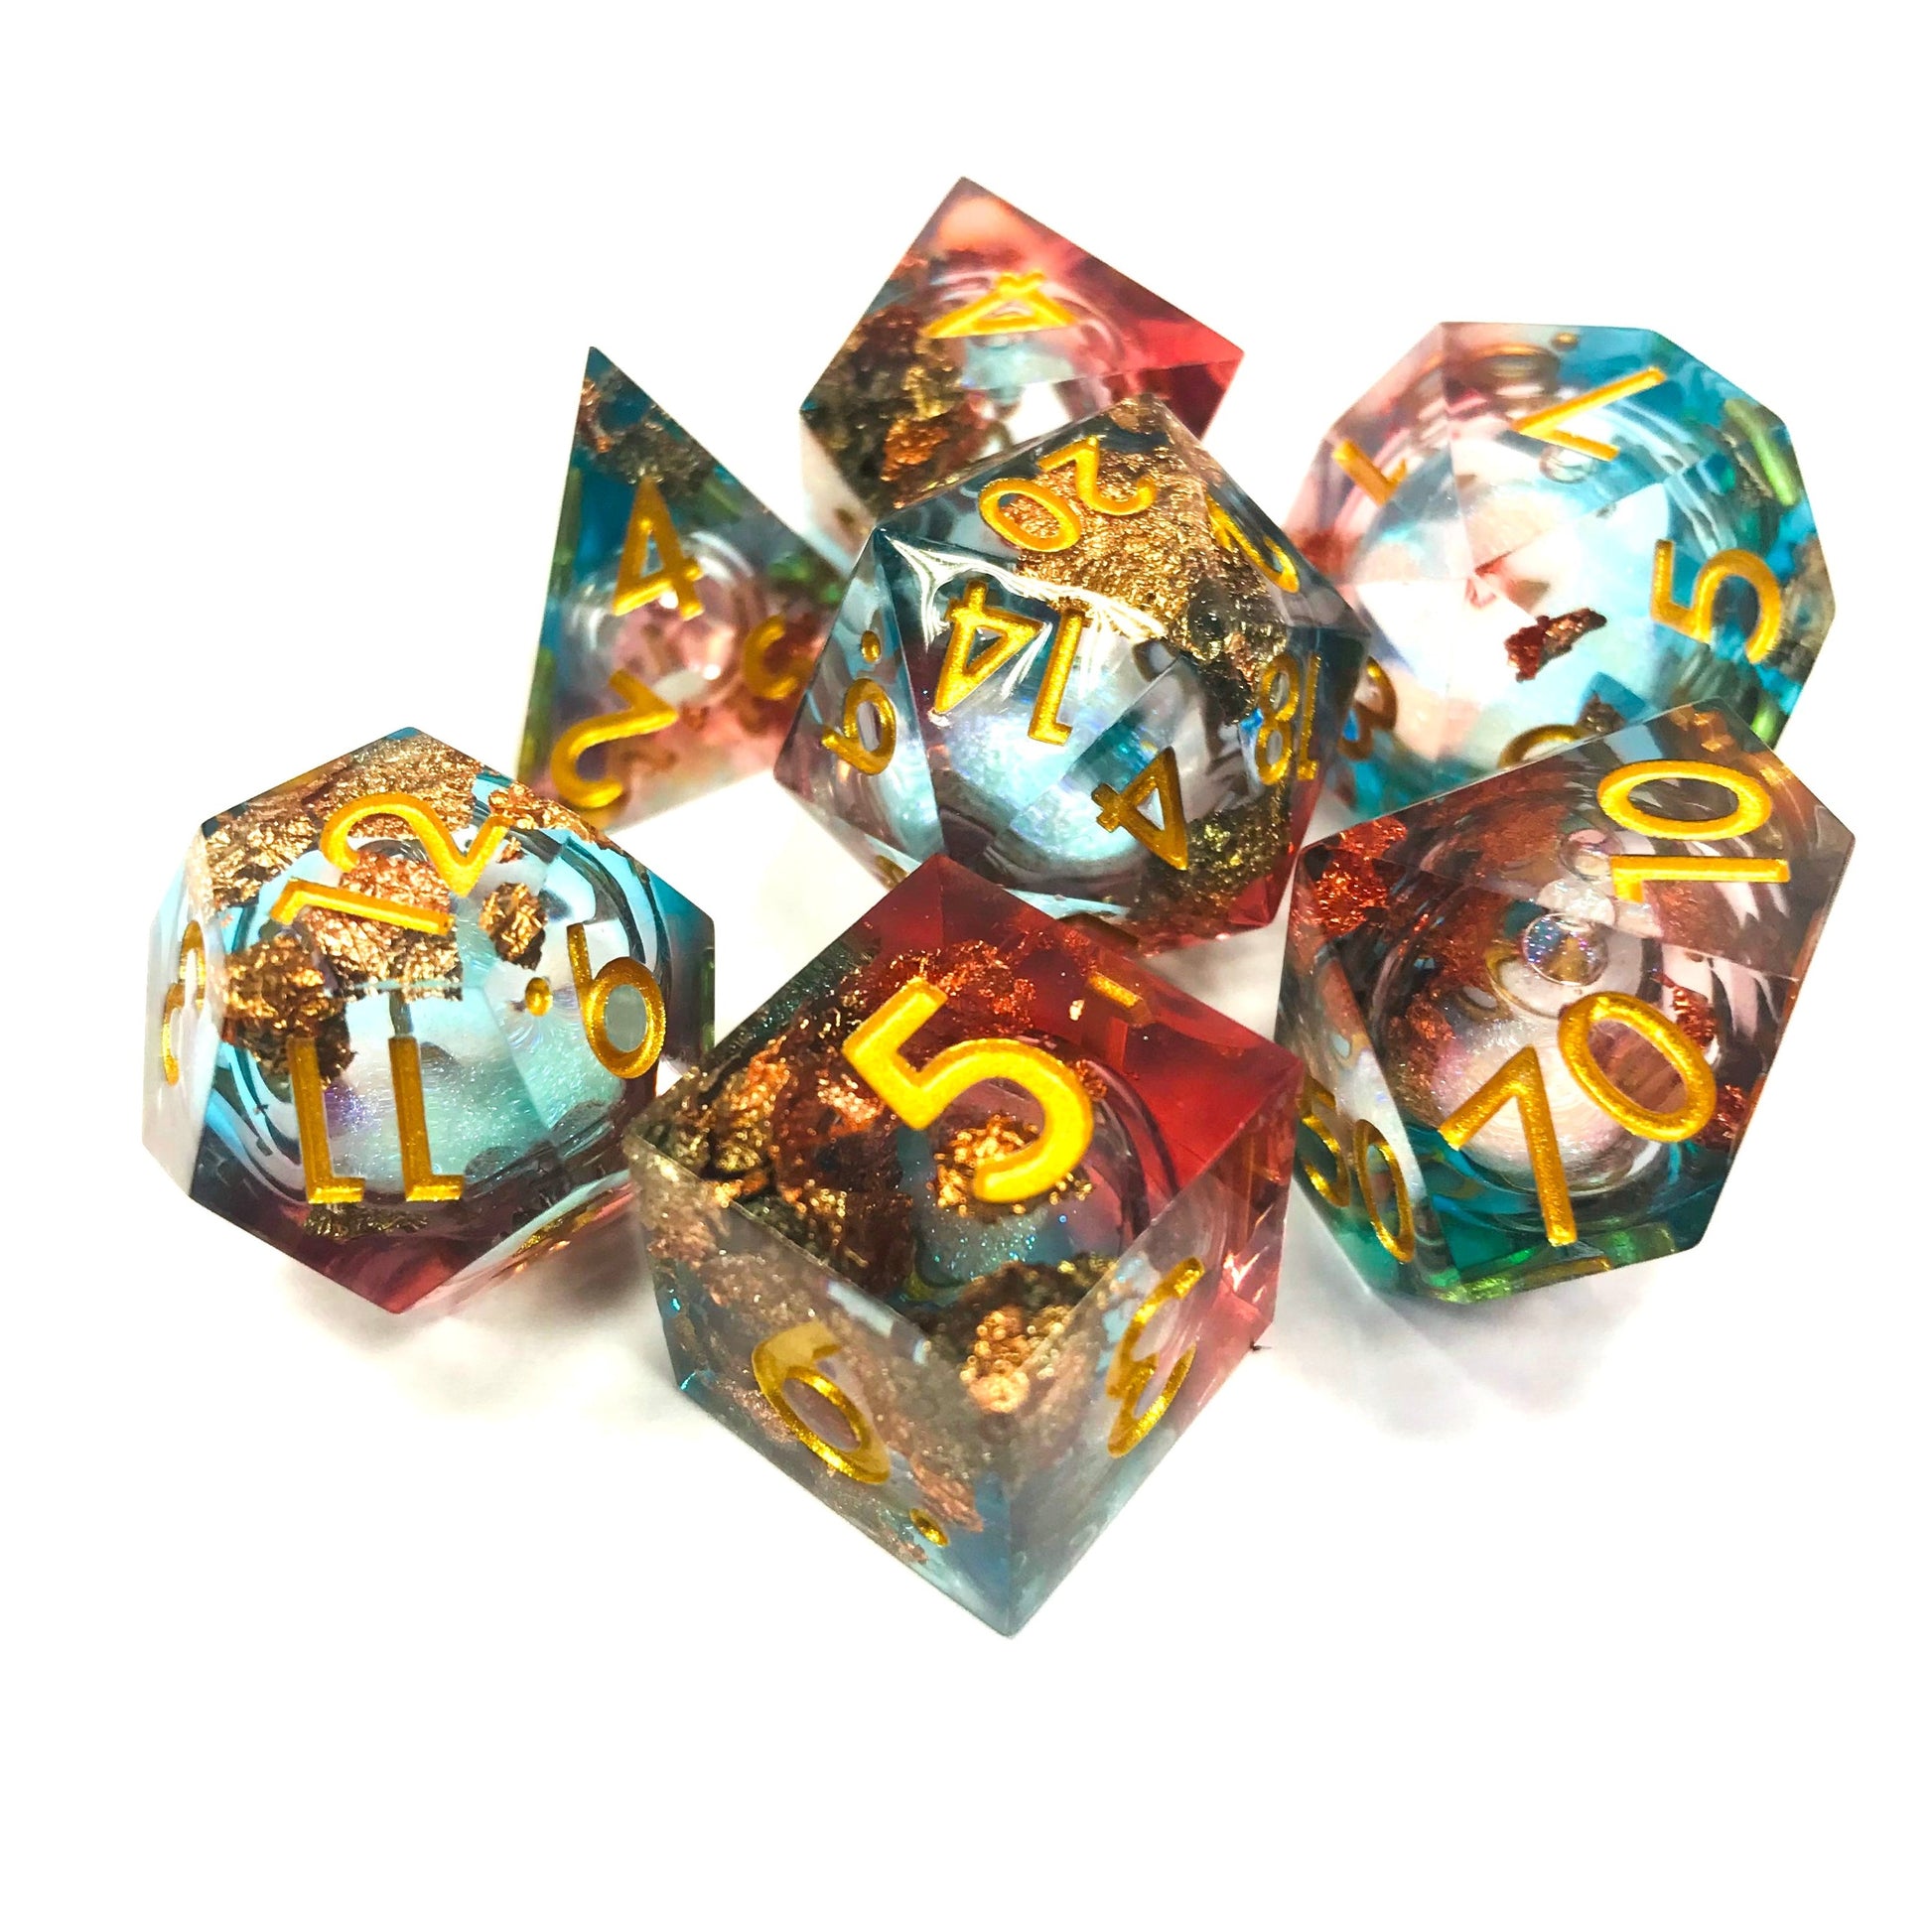 Twist of Fate sharp edge with liquid core dnd dice set for critical critters, dice goblin and dice dragon collectors